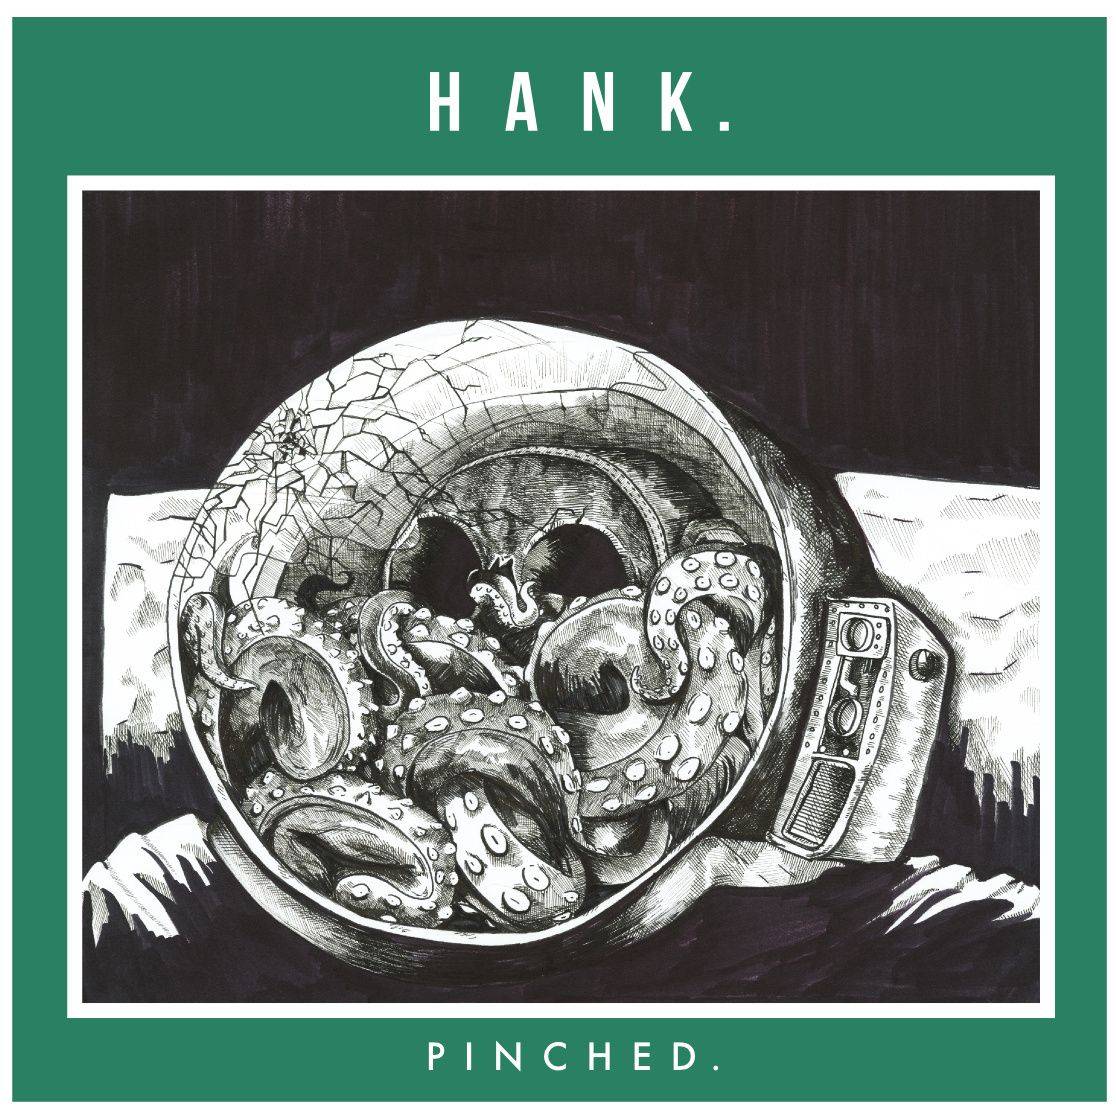 “My lightning bolt, my filament”: Hank.’s Pinched. in review